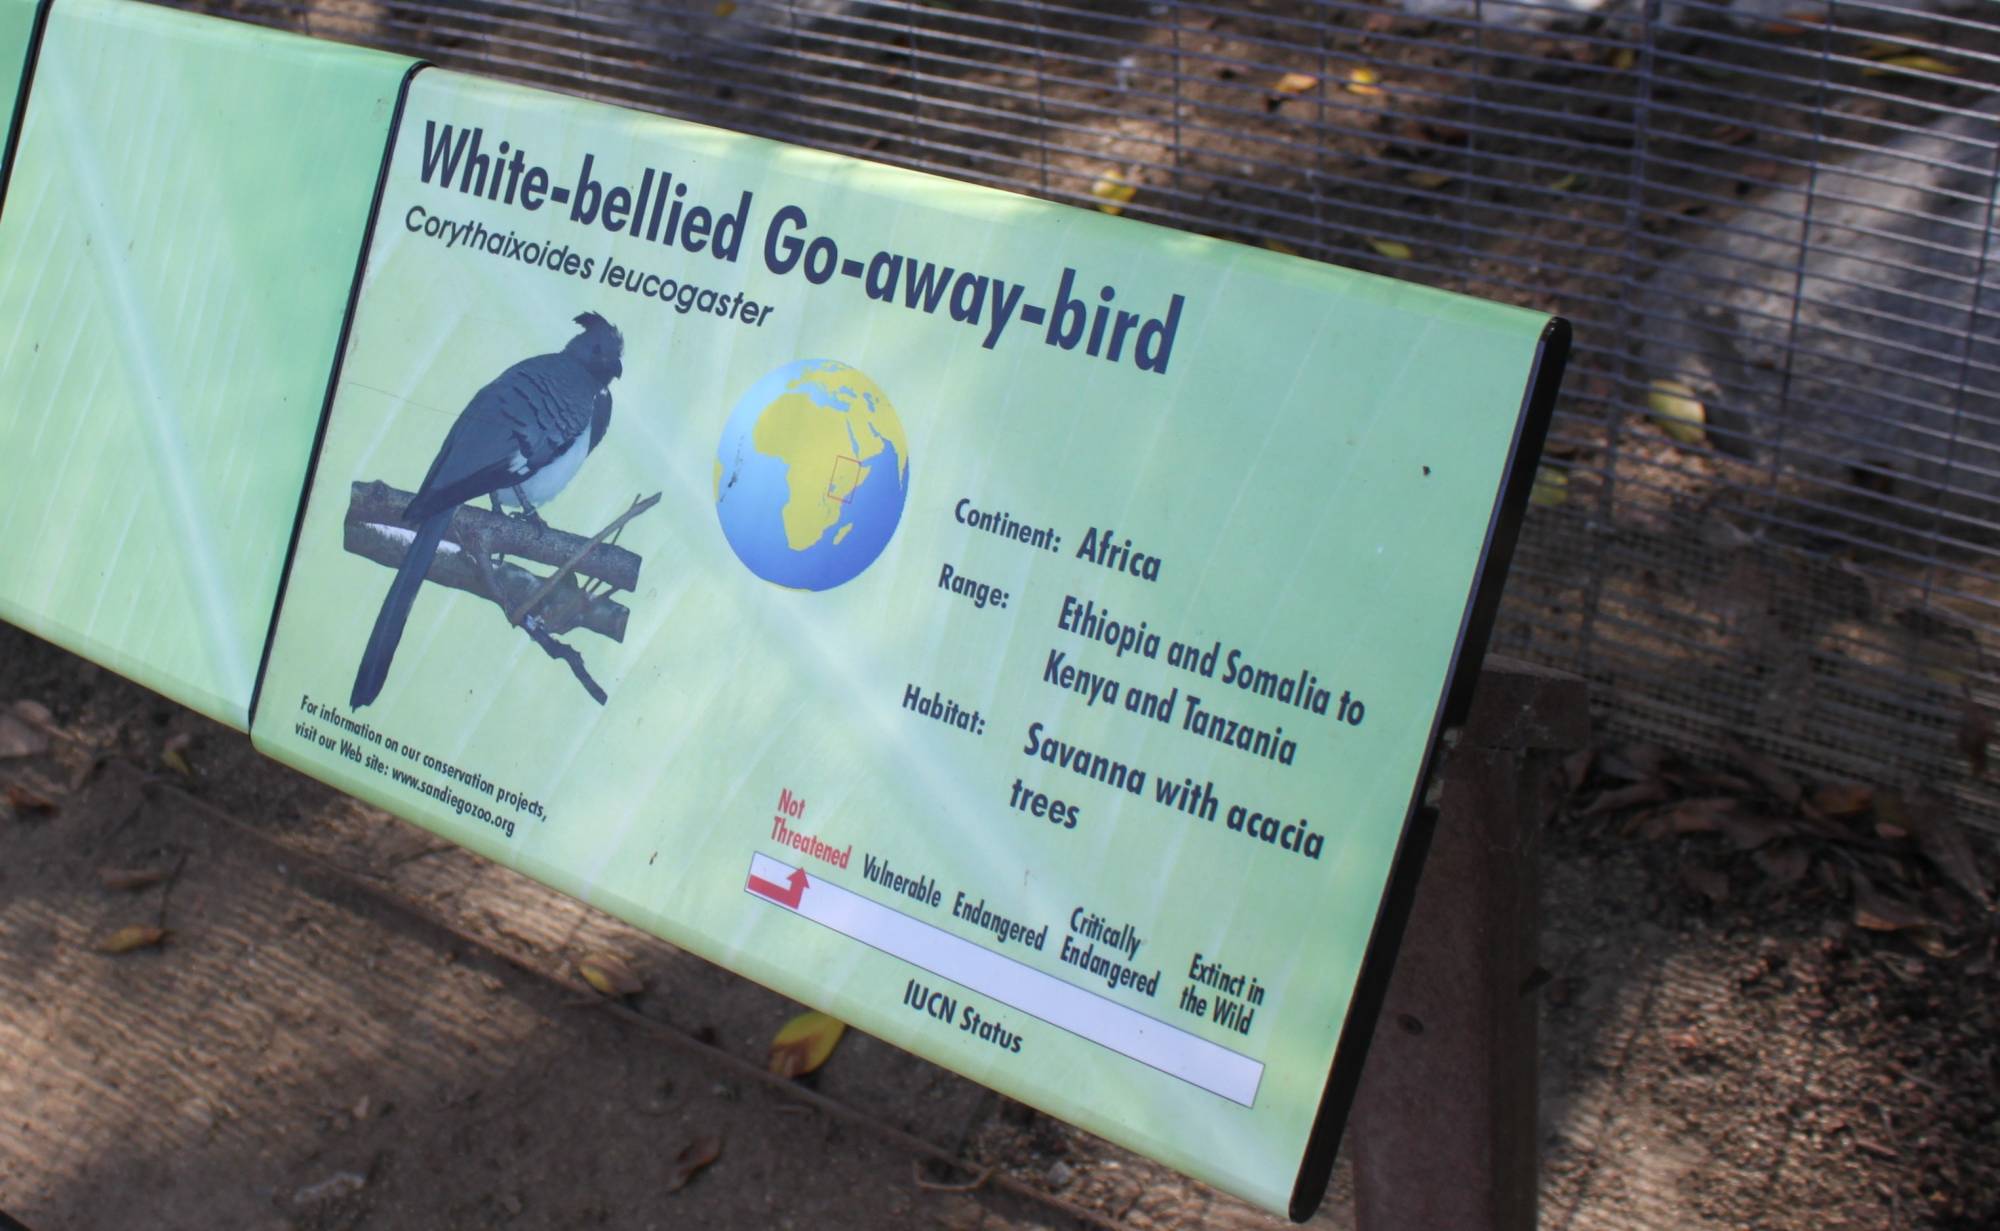 Sign for the Go-Away Bird at the San Diego Zoo